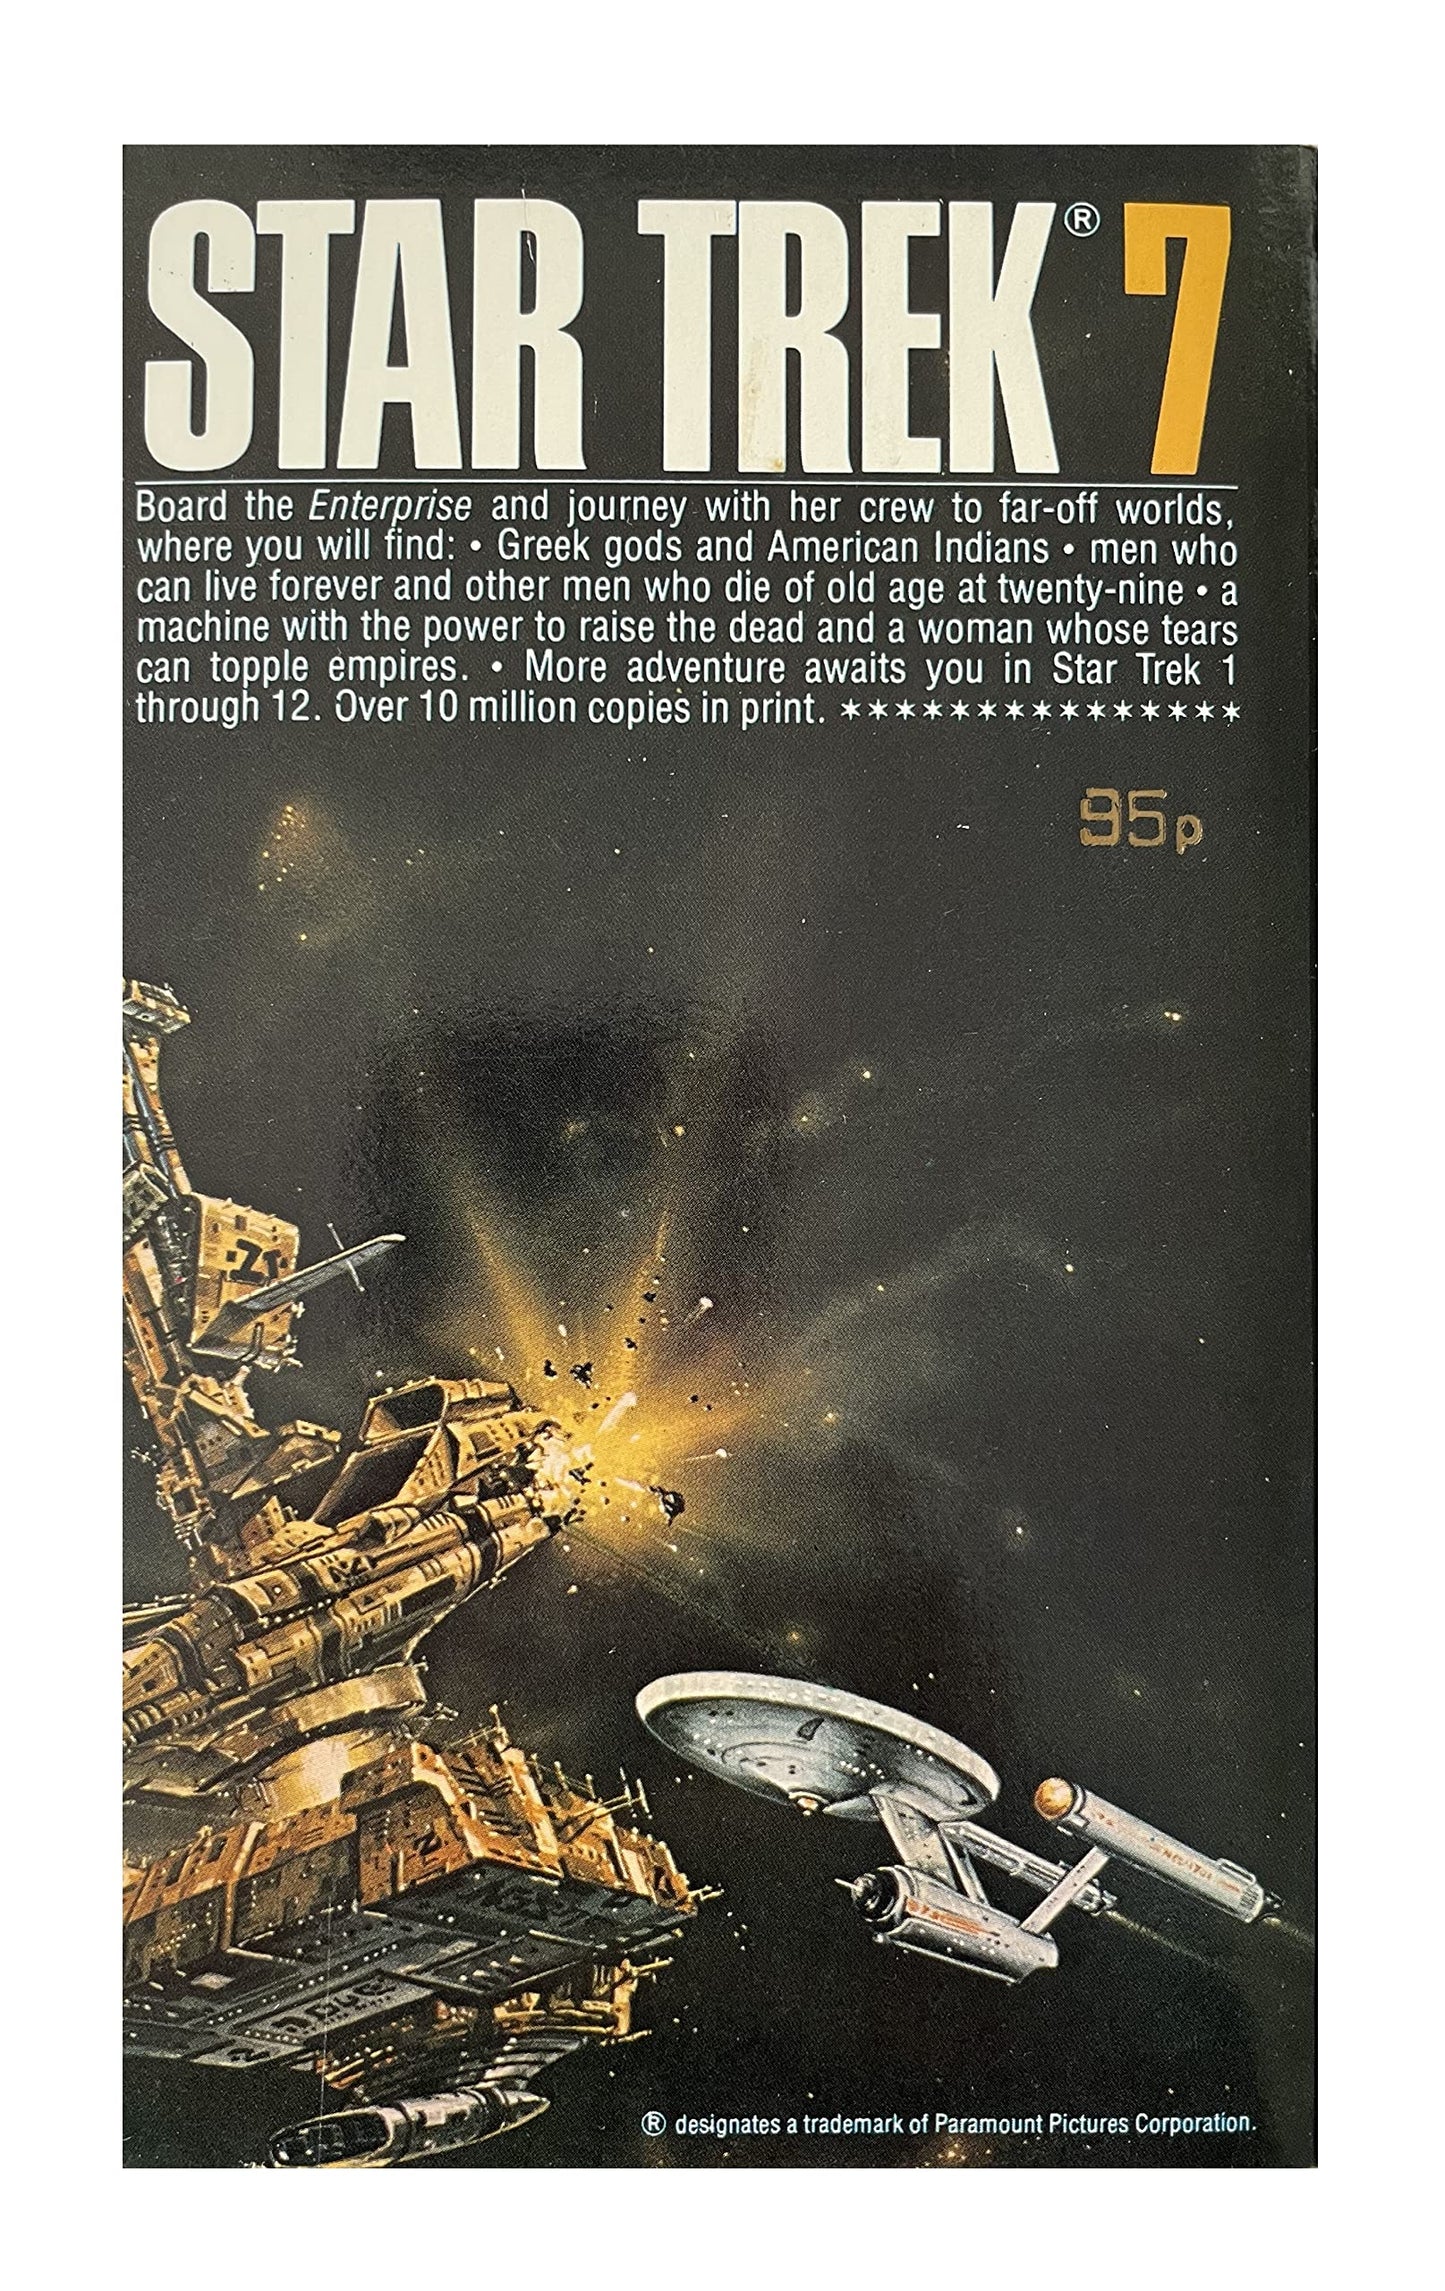 Vintage 1979 Star Trek 7 - Adapted From The Original Television Series - Paperback Book - By James Blish